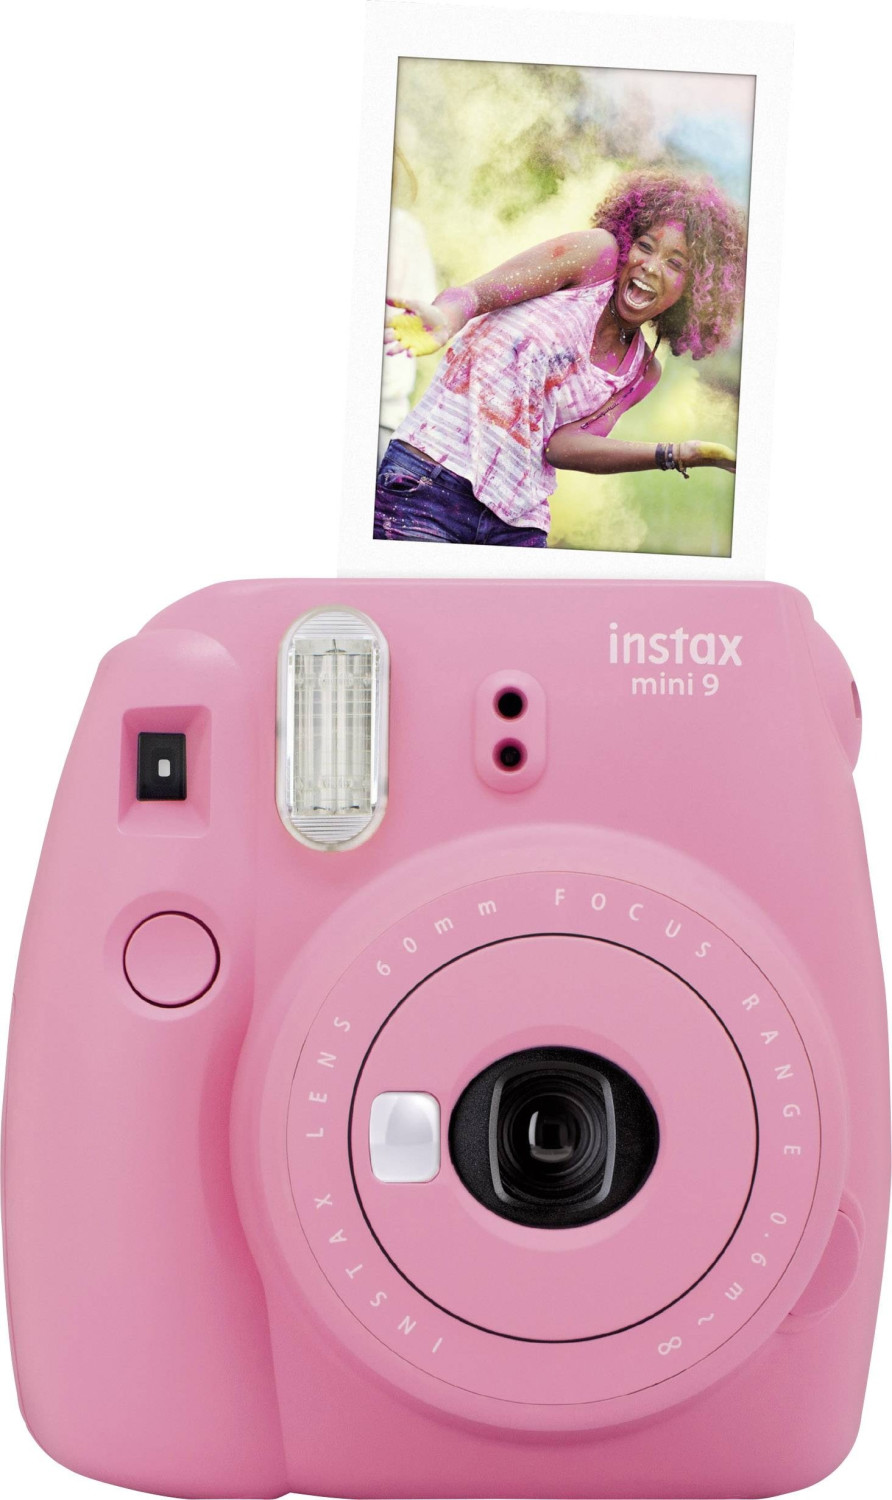 Buy Fujifilm Instax Mini 9 Flamingo Pink from £64.99 (Today) – Best Deals  on